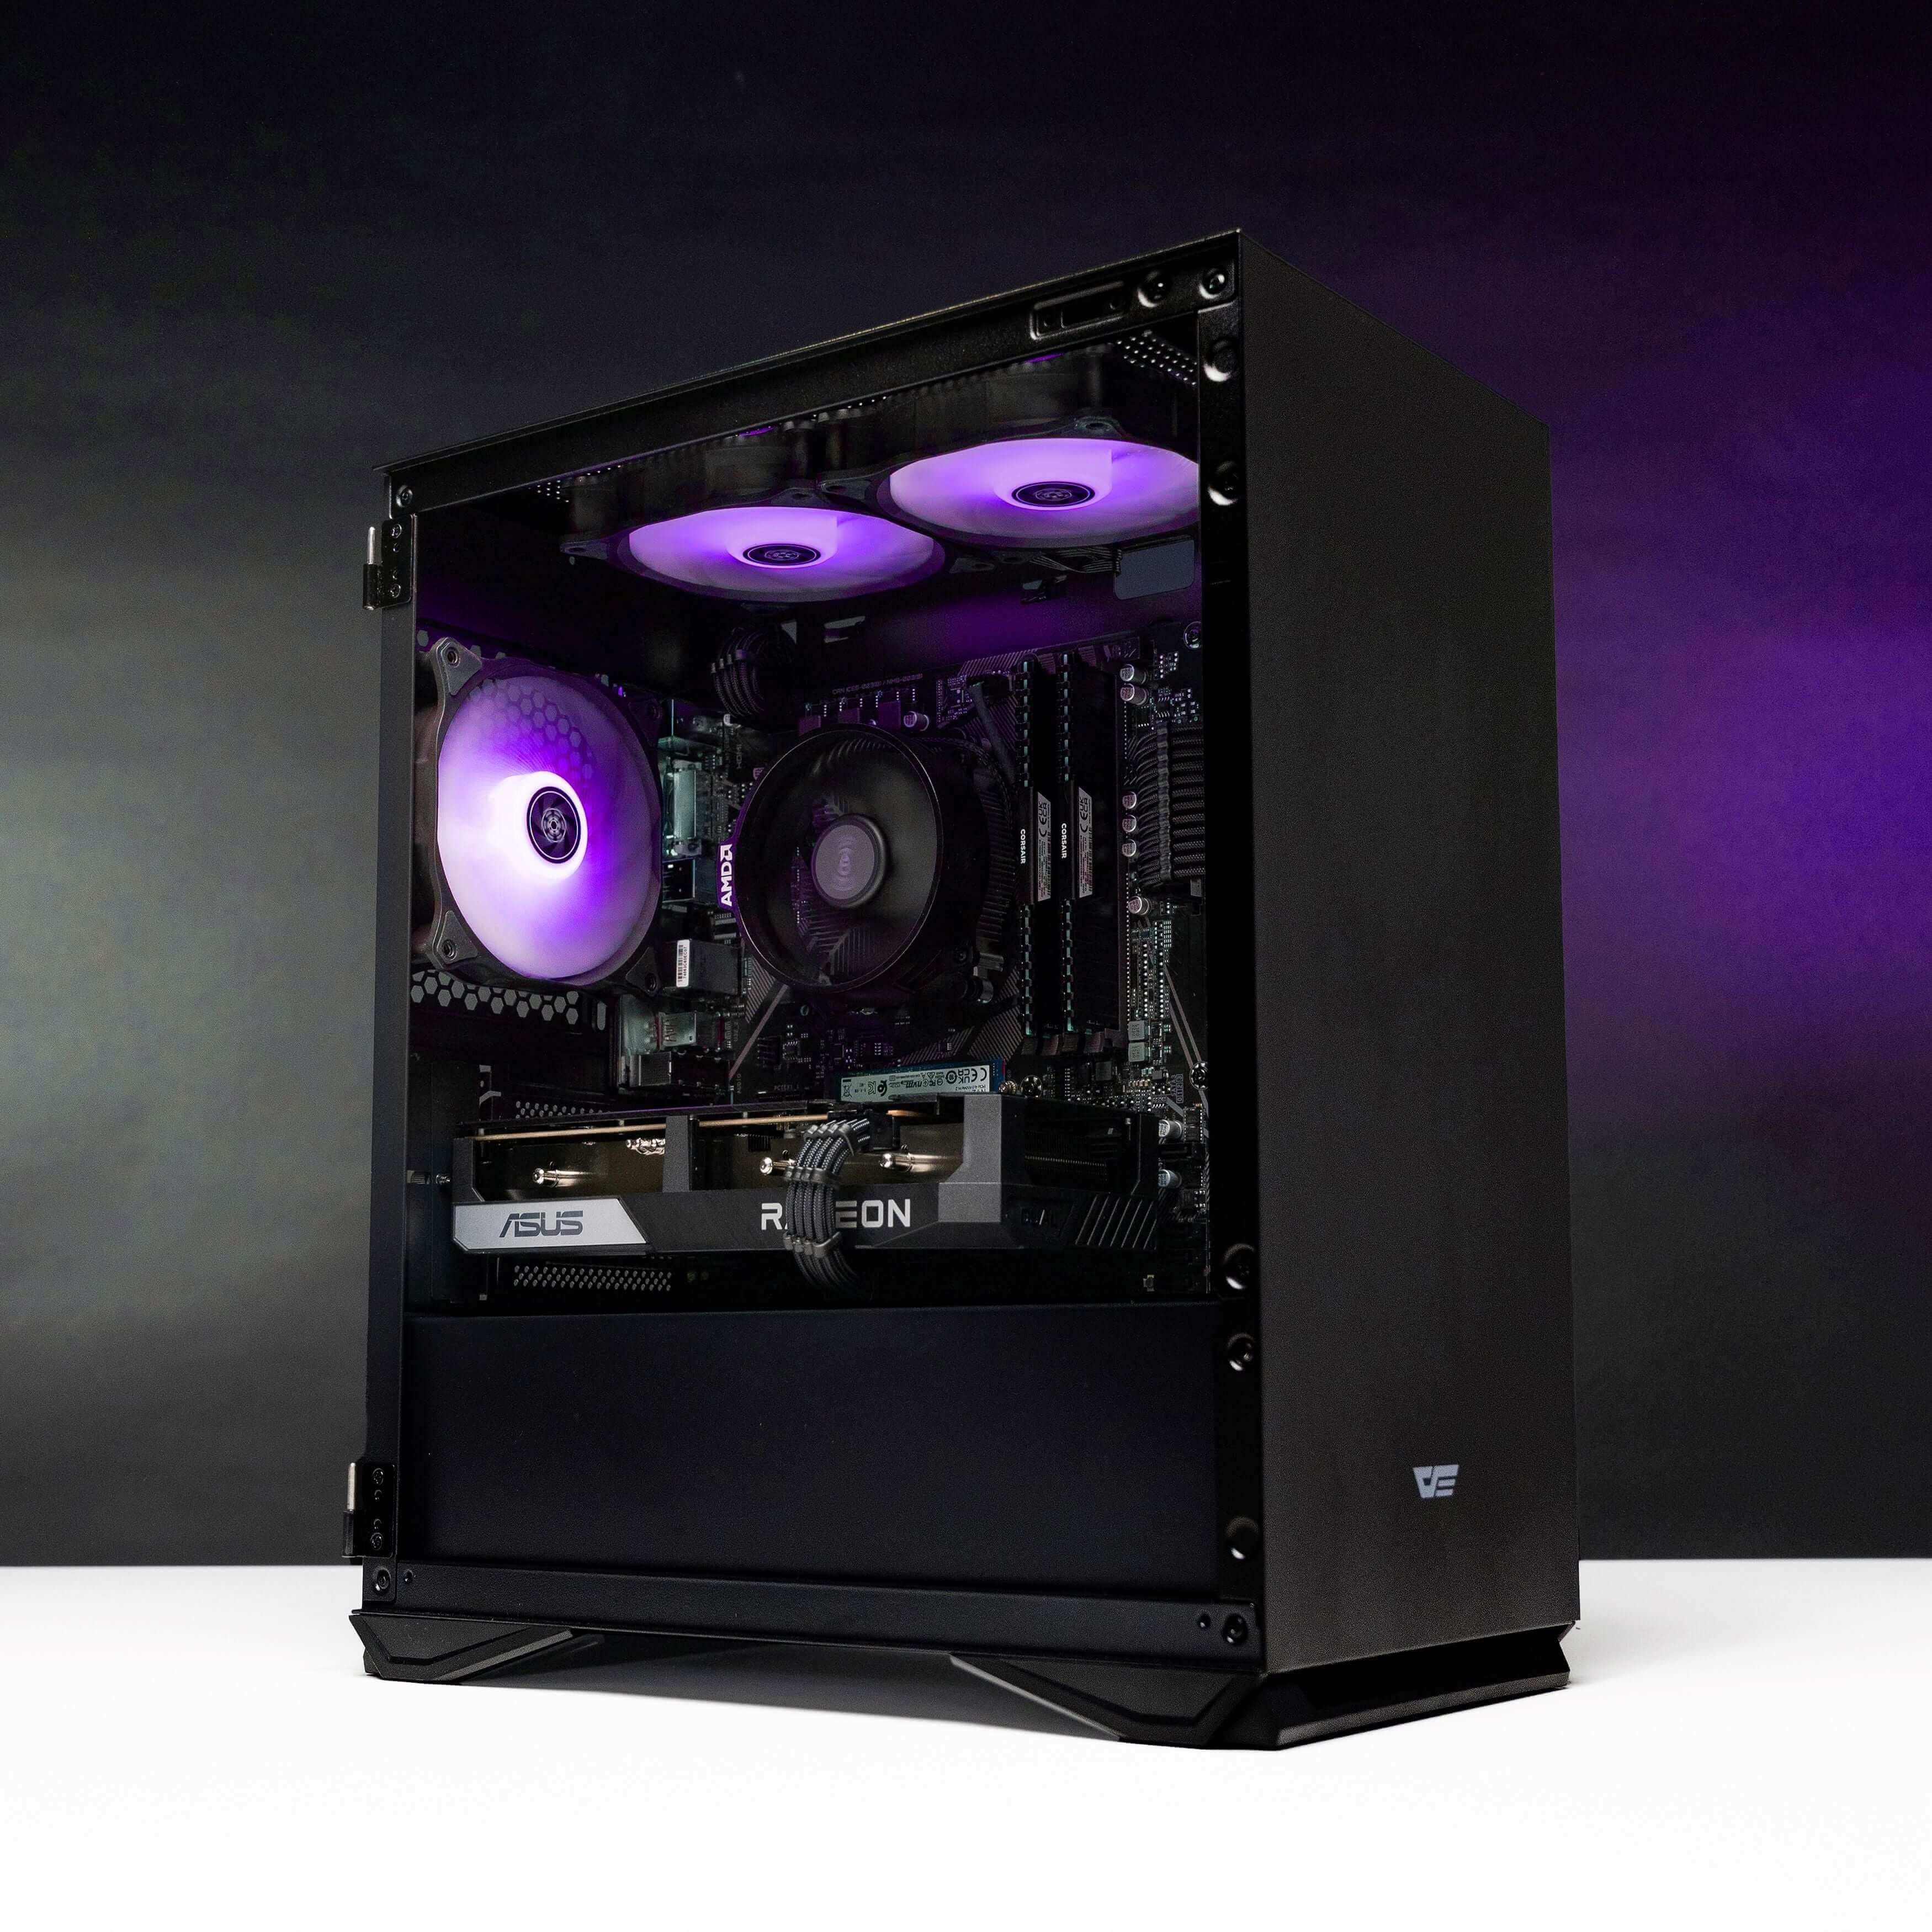  Side view of the impressive ARROW: LVL 4 PC showcases its powerful components, making it a gaming beast.